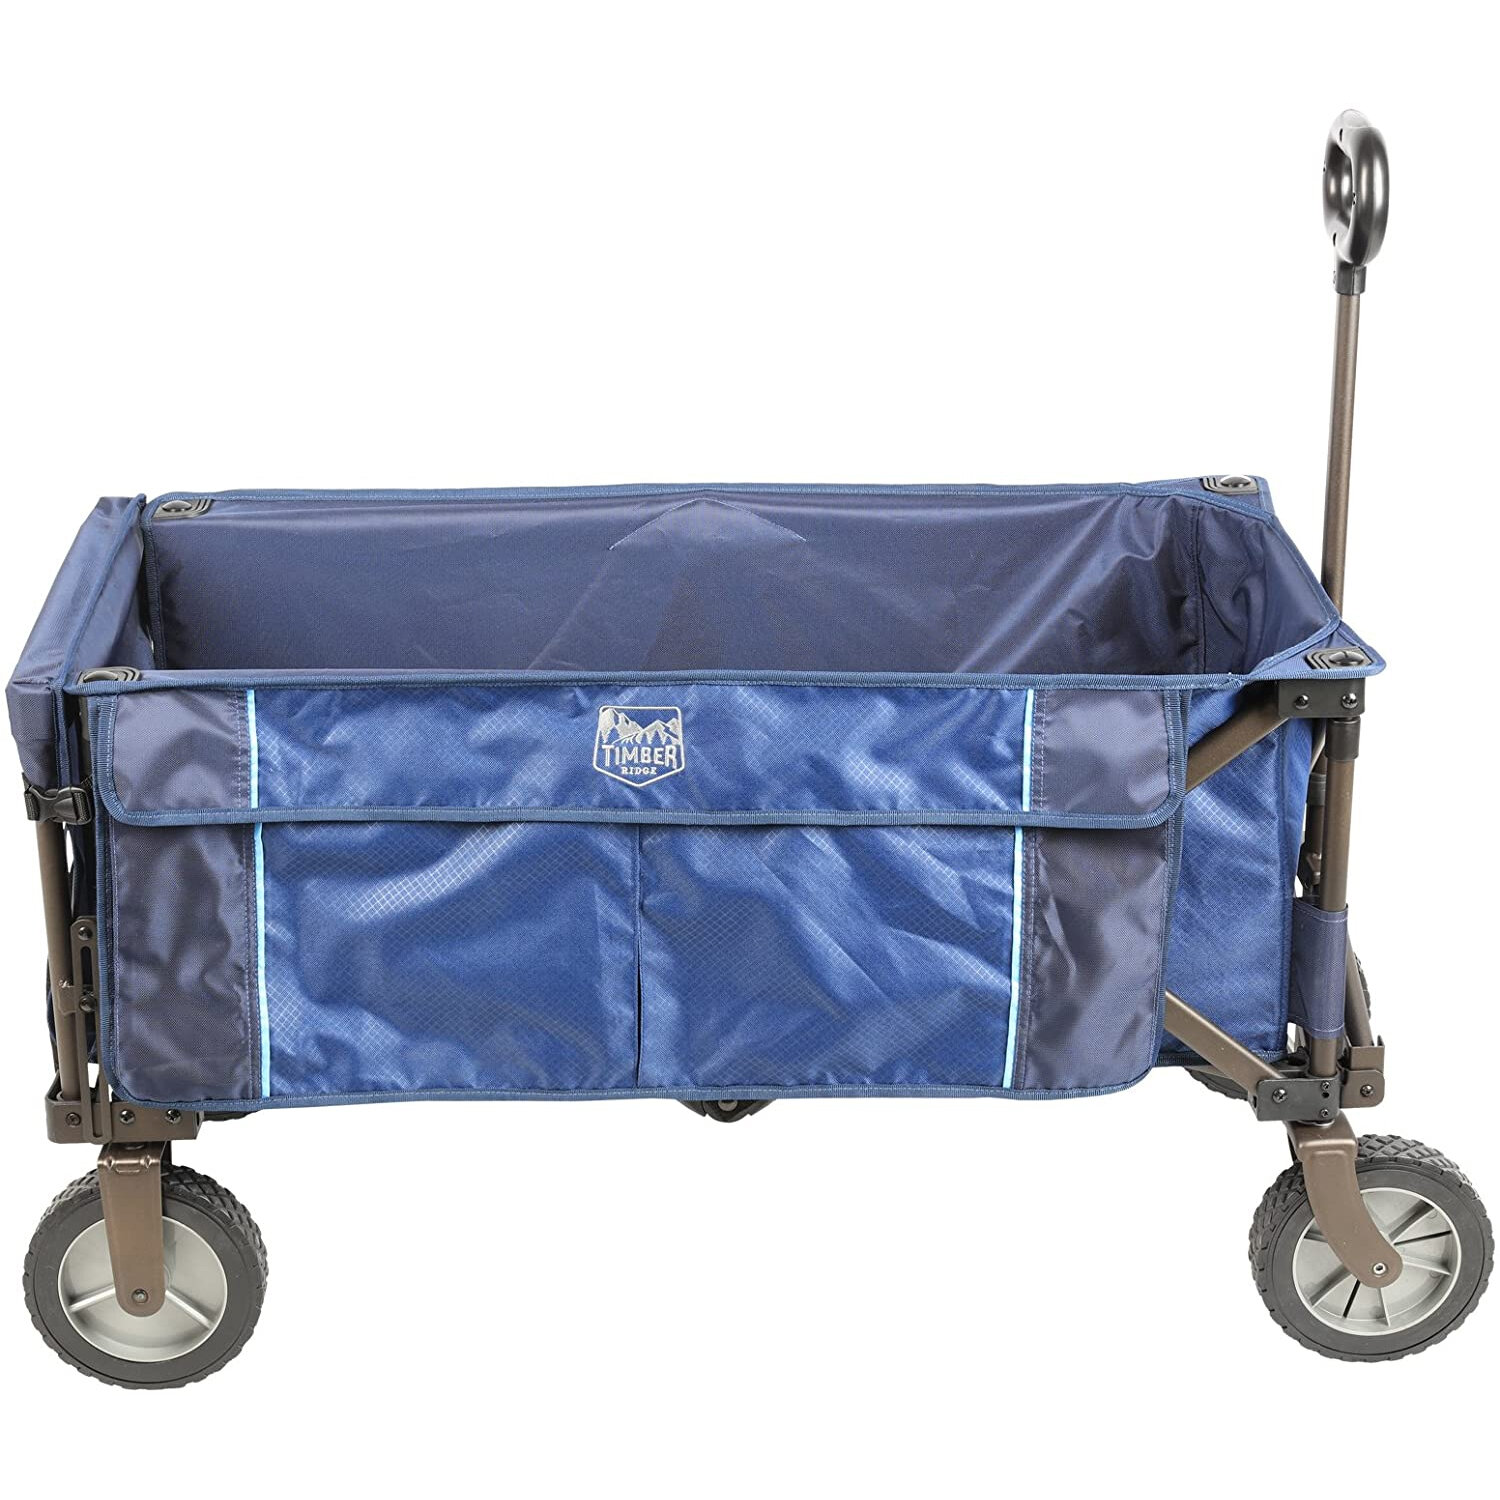 Collapsible Folding Outdoor Utility Wagon for Shopping Beach Outdoors Blue AOOLIVE Heavy Duty Garden Cart 